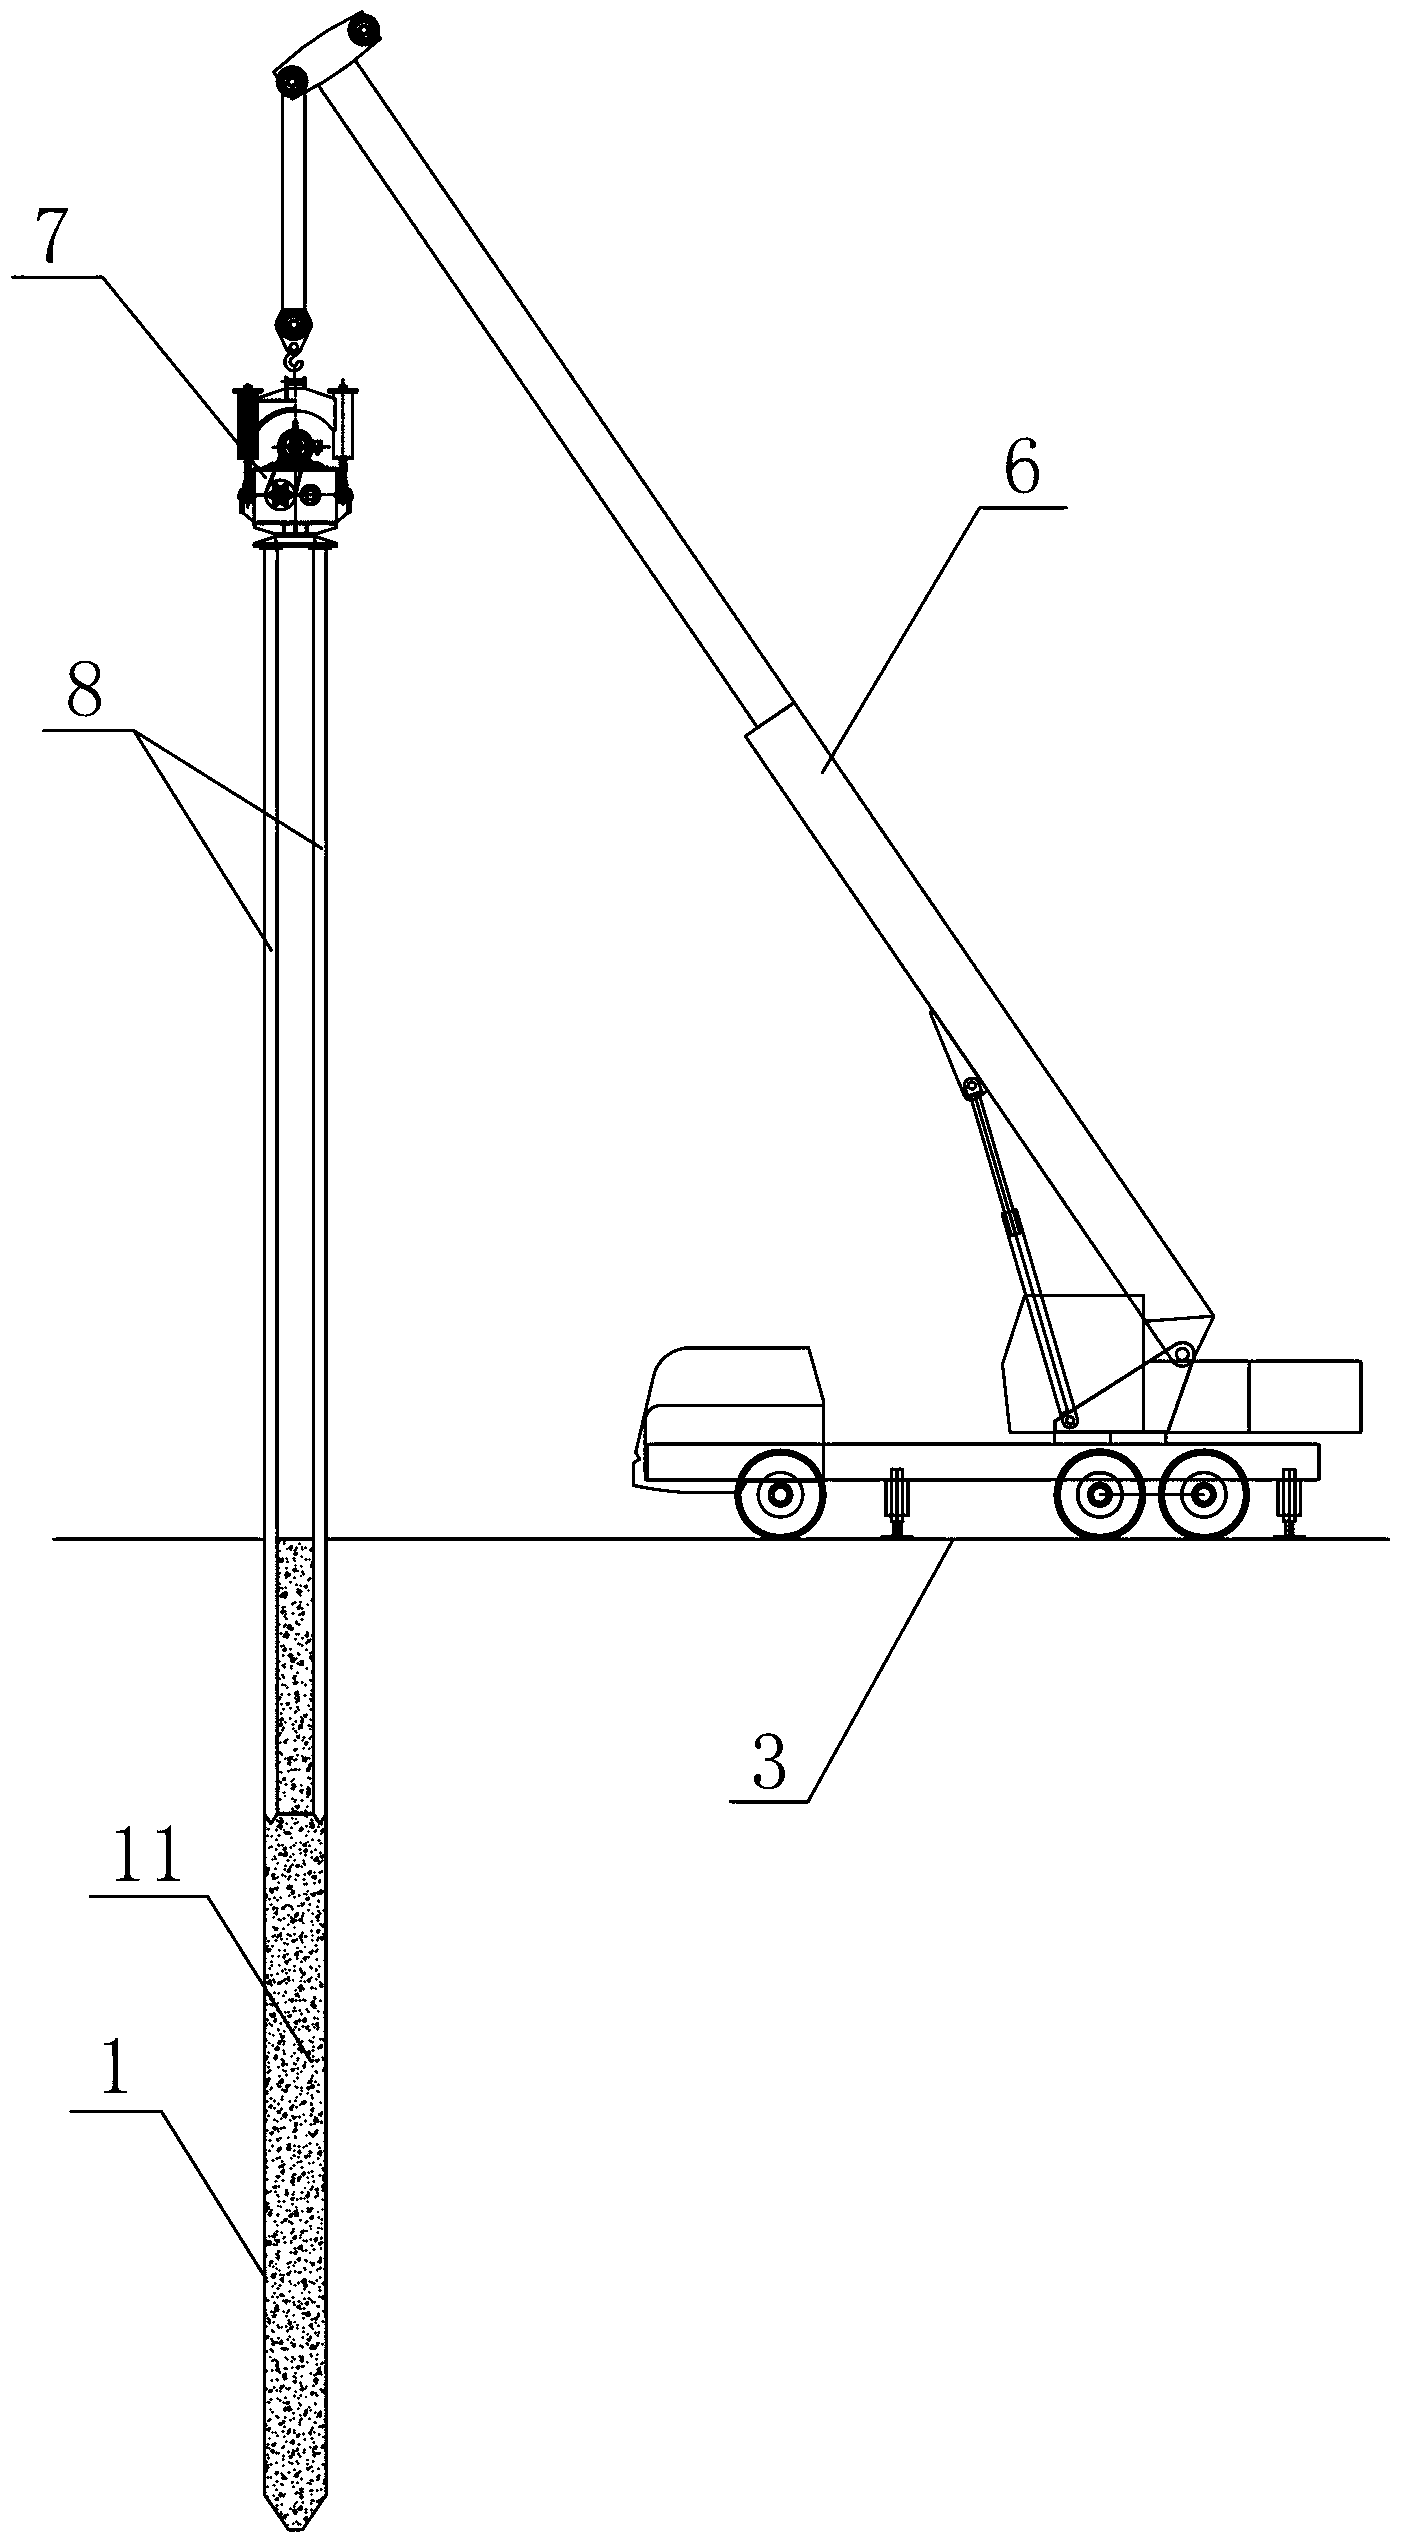 Construction method for fabricating composite waterproof curtain by embedding rigid piles into low-strength concrete piles